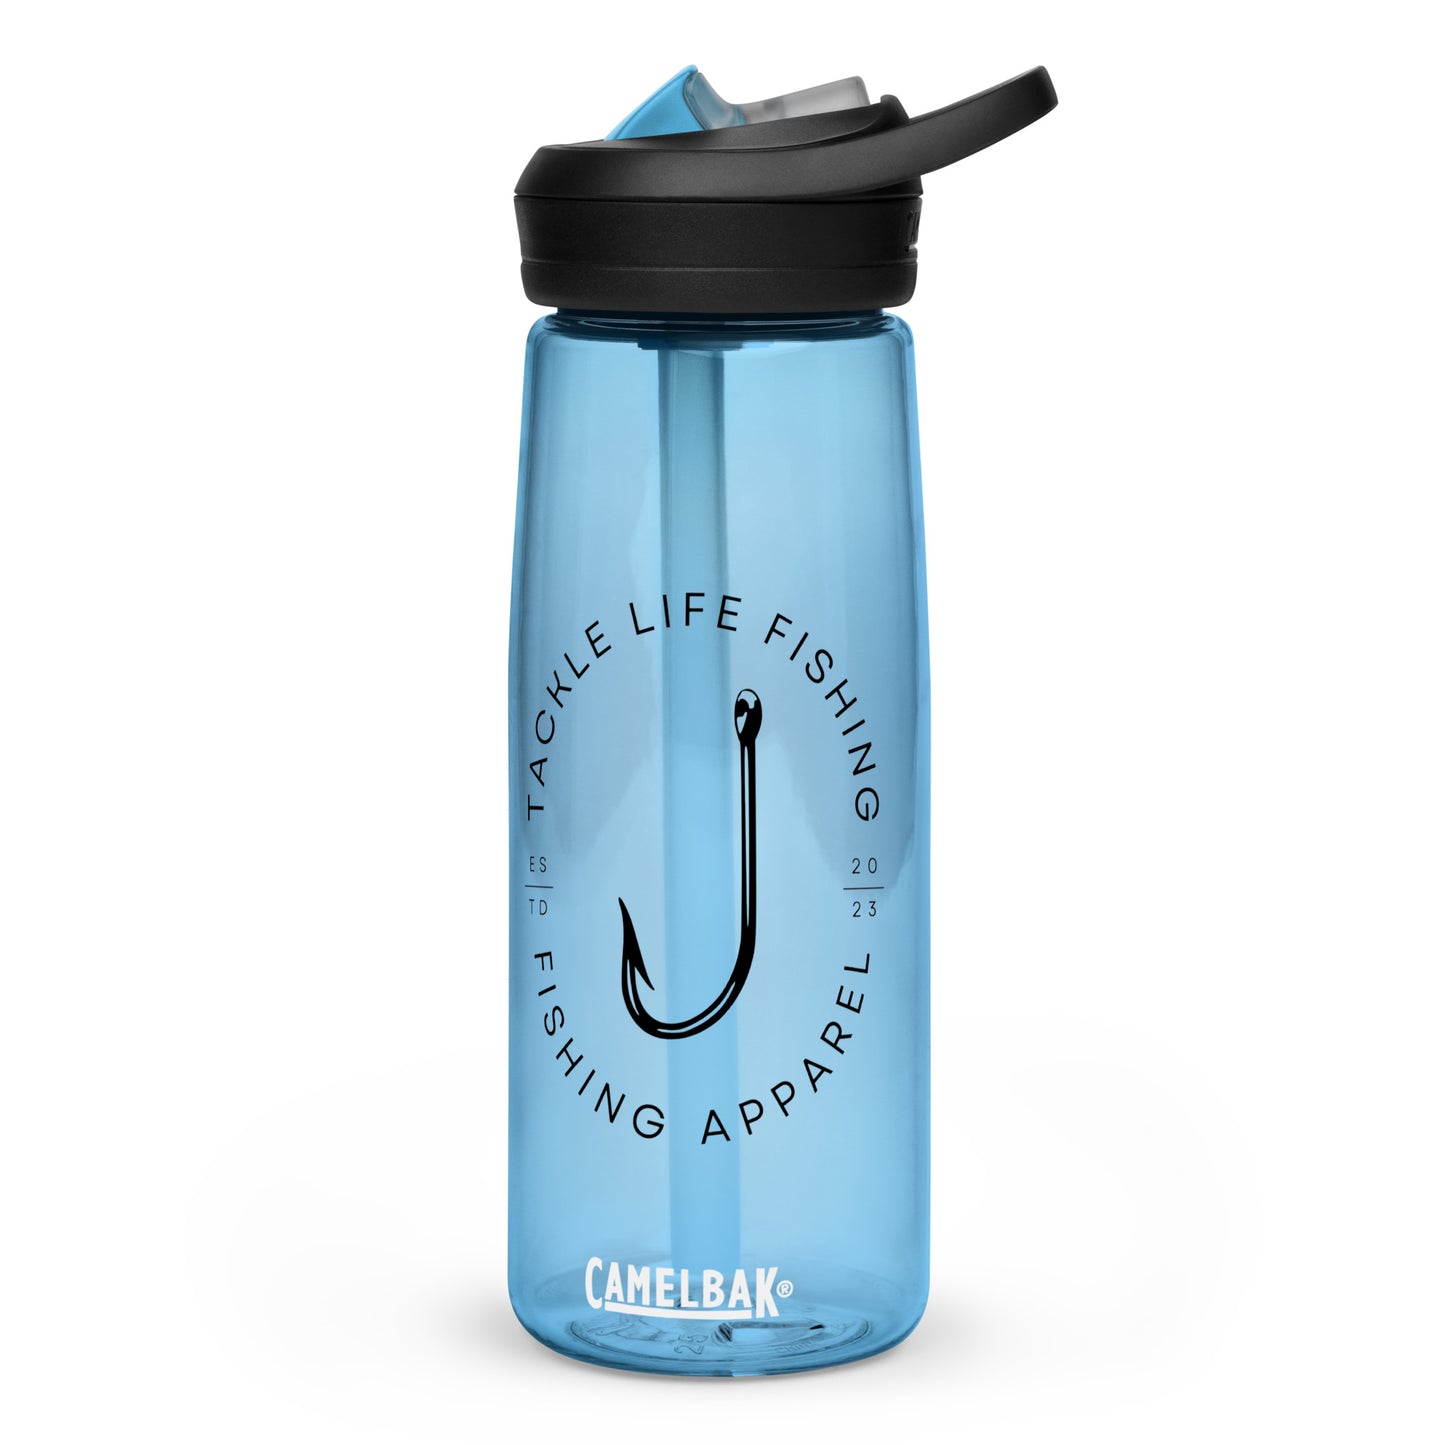 TLF Flagship Logo Recycled Plastic Water Bottle - Oxford Blue, Blue, Charcoal or Clear